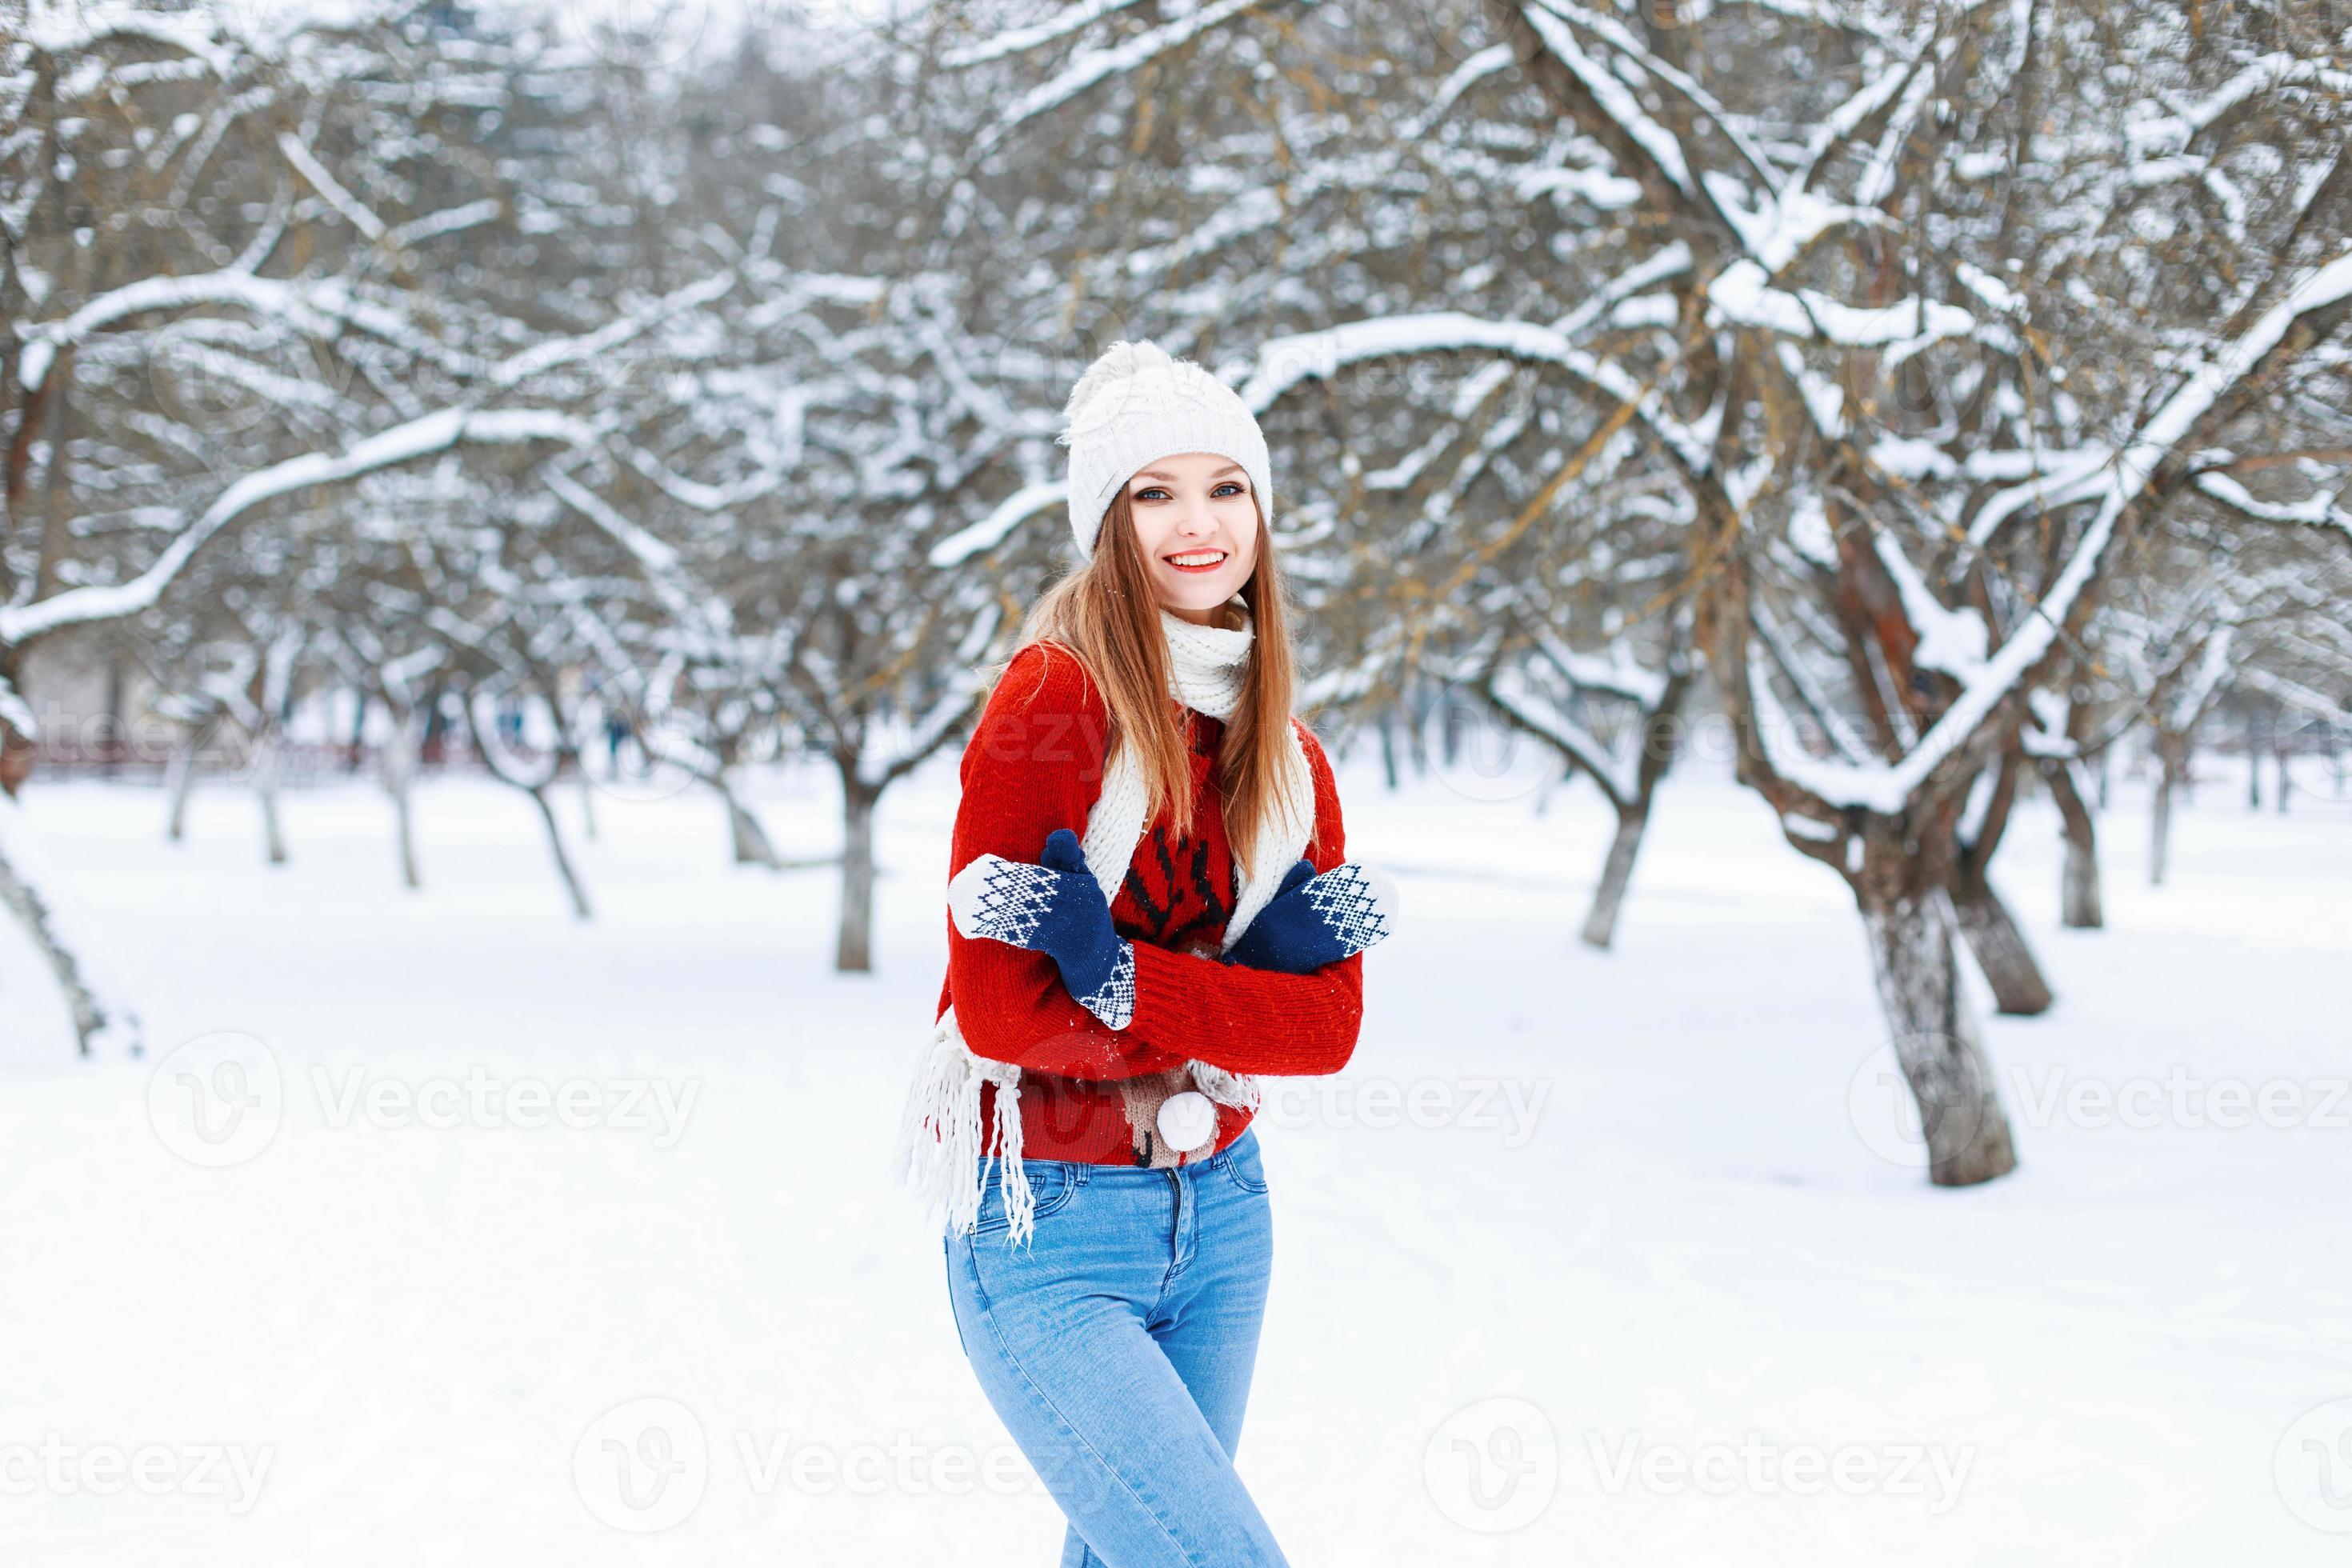 https://static.vecteezy.com/system/resources/previews/009/856/079/large_2x/young-fashionable-girl-in-a-warm-vintage-winter-clothes-in-winter-snowy-day-photo.jpg